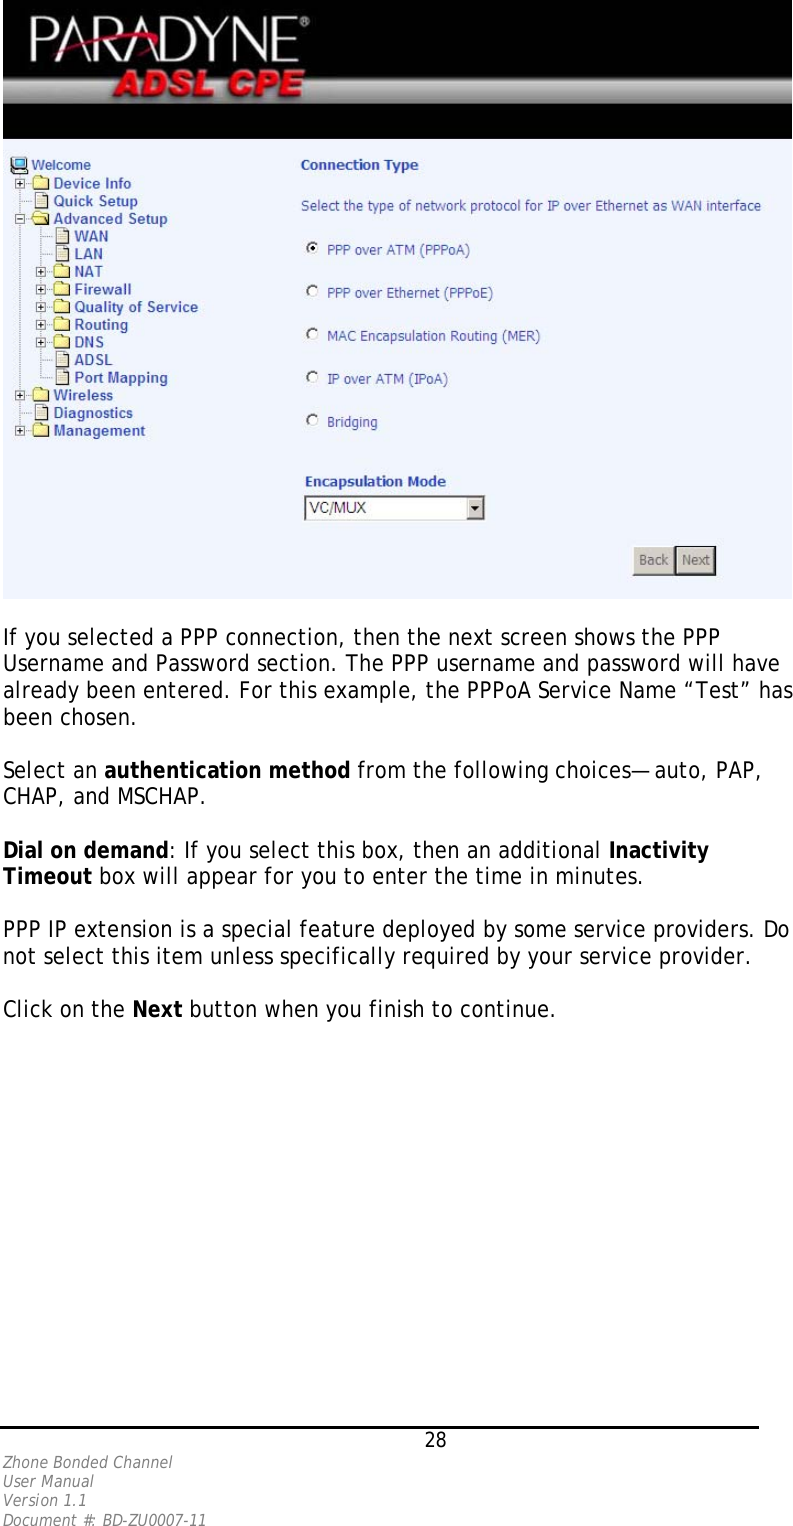   If you selected a PPP connection, then the next screen shows the PPP Username and Password section. The PPP username and password will have already been entered. For this example, the PPPoA Service Name “Test” has been chosen.   Select an authentication method from the following choices— auto, PAP, CHAP, and MSCHAP.   Dial on demand: If you select this box, then an additional Inactivity Timeout box will appear for you to enter the time in minutes.  PPP IP extension is a special feature deployed by some service providers. Do not select this item unless specifically required by your service provider.  Click on the Next button when you finish to continue.    28 Zhone Bonded Channel User Manual  Version 1.1 Document #: BD-ZU0007-11 